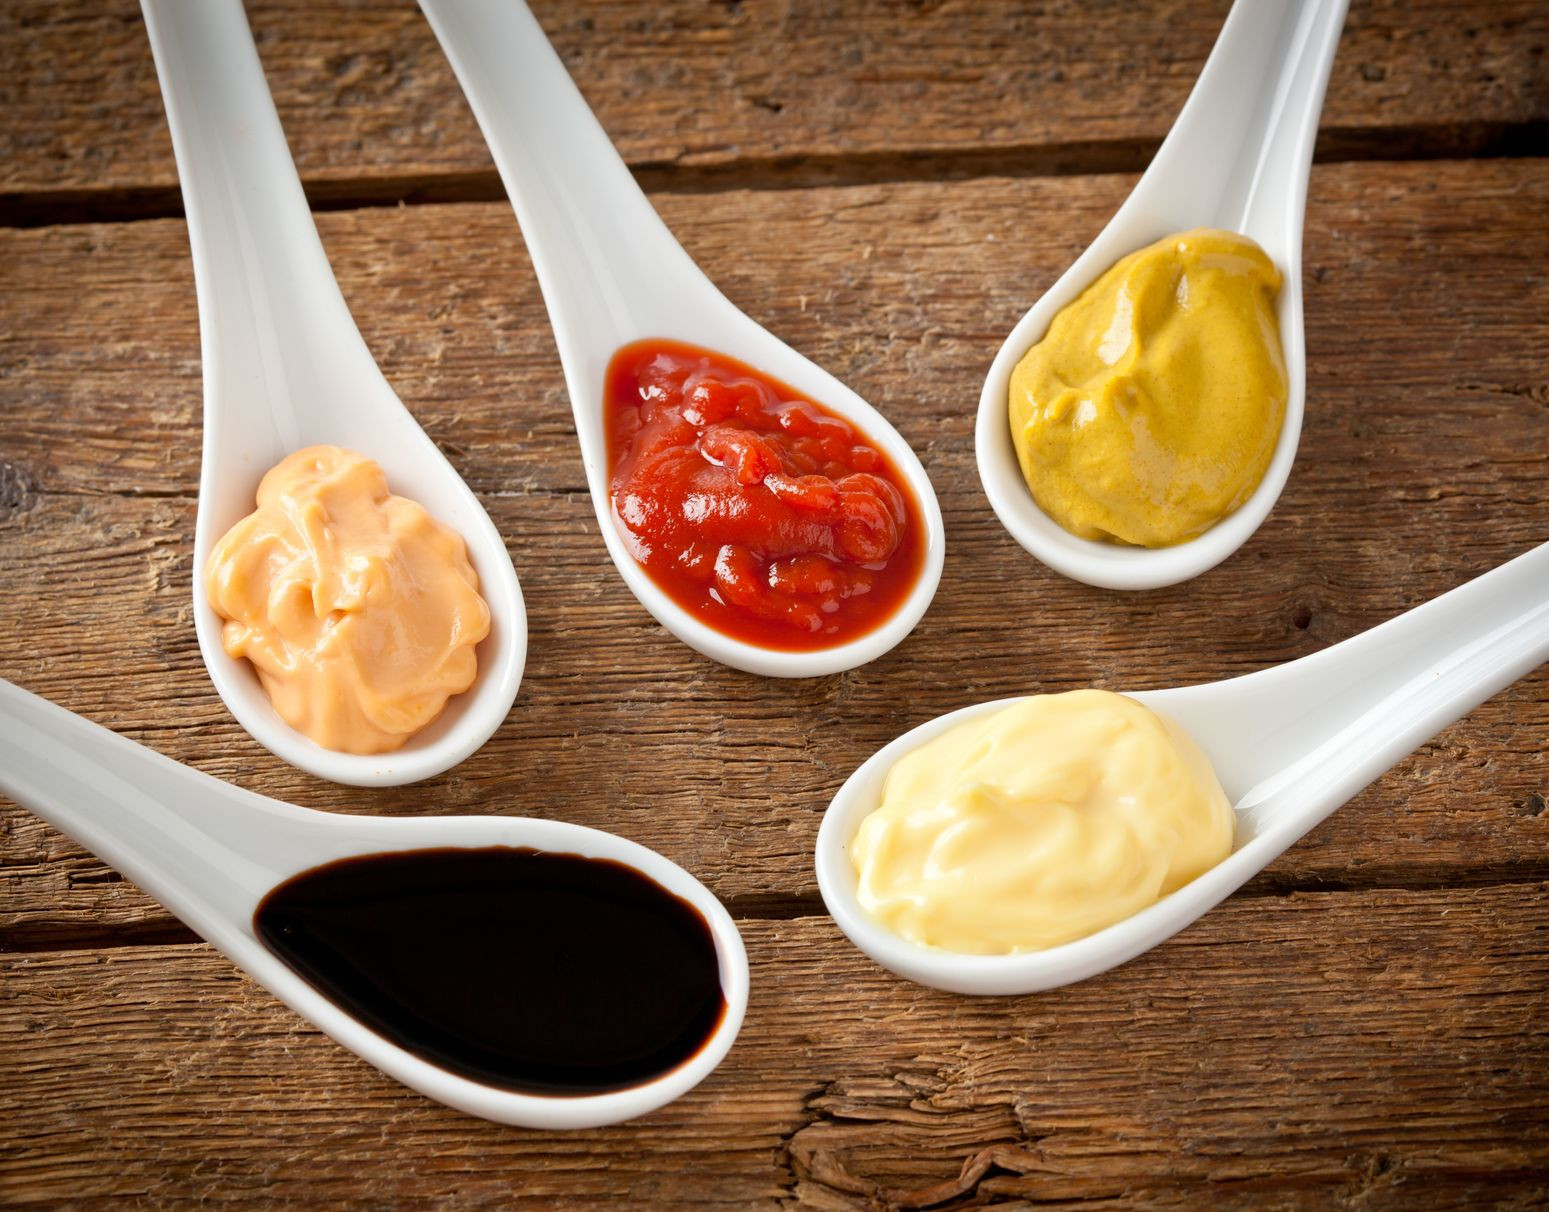 List Of Sauces And Condiments
 Sandwich Staples The Top Condiments for a Tasty Sandwich